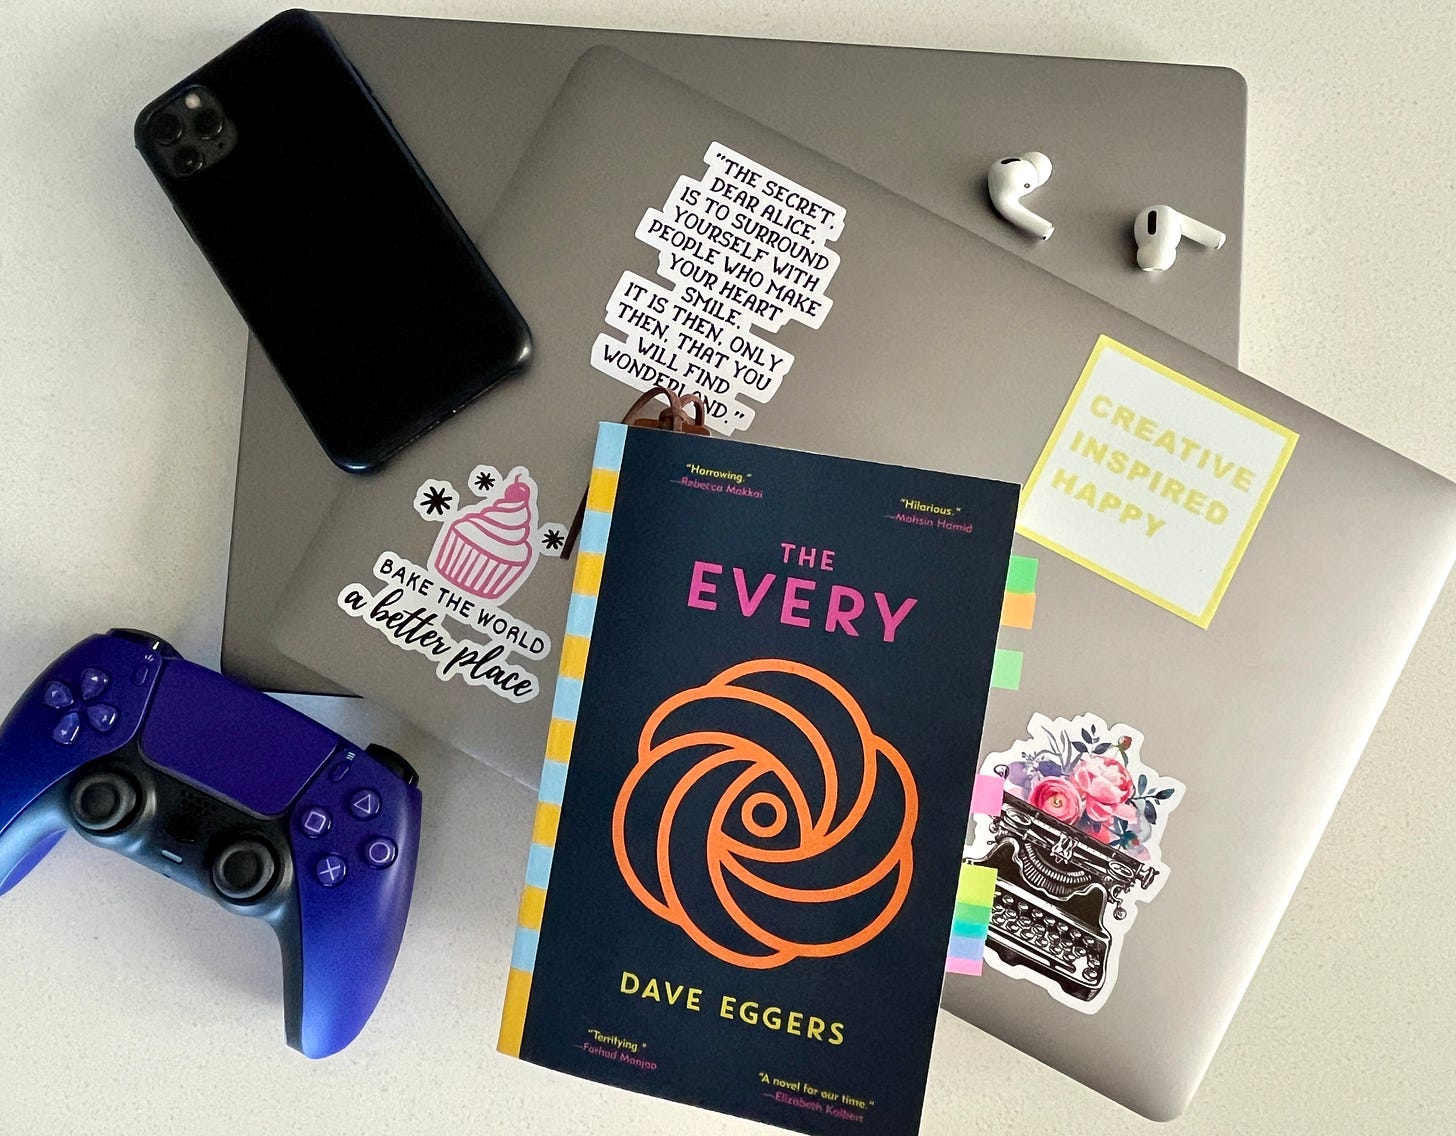 THE EVERY by Dave Eggers on top of a stack of laptops, with a phone, Airpods, and video game controller surrounding the book.